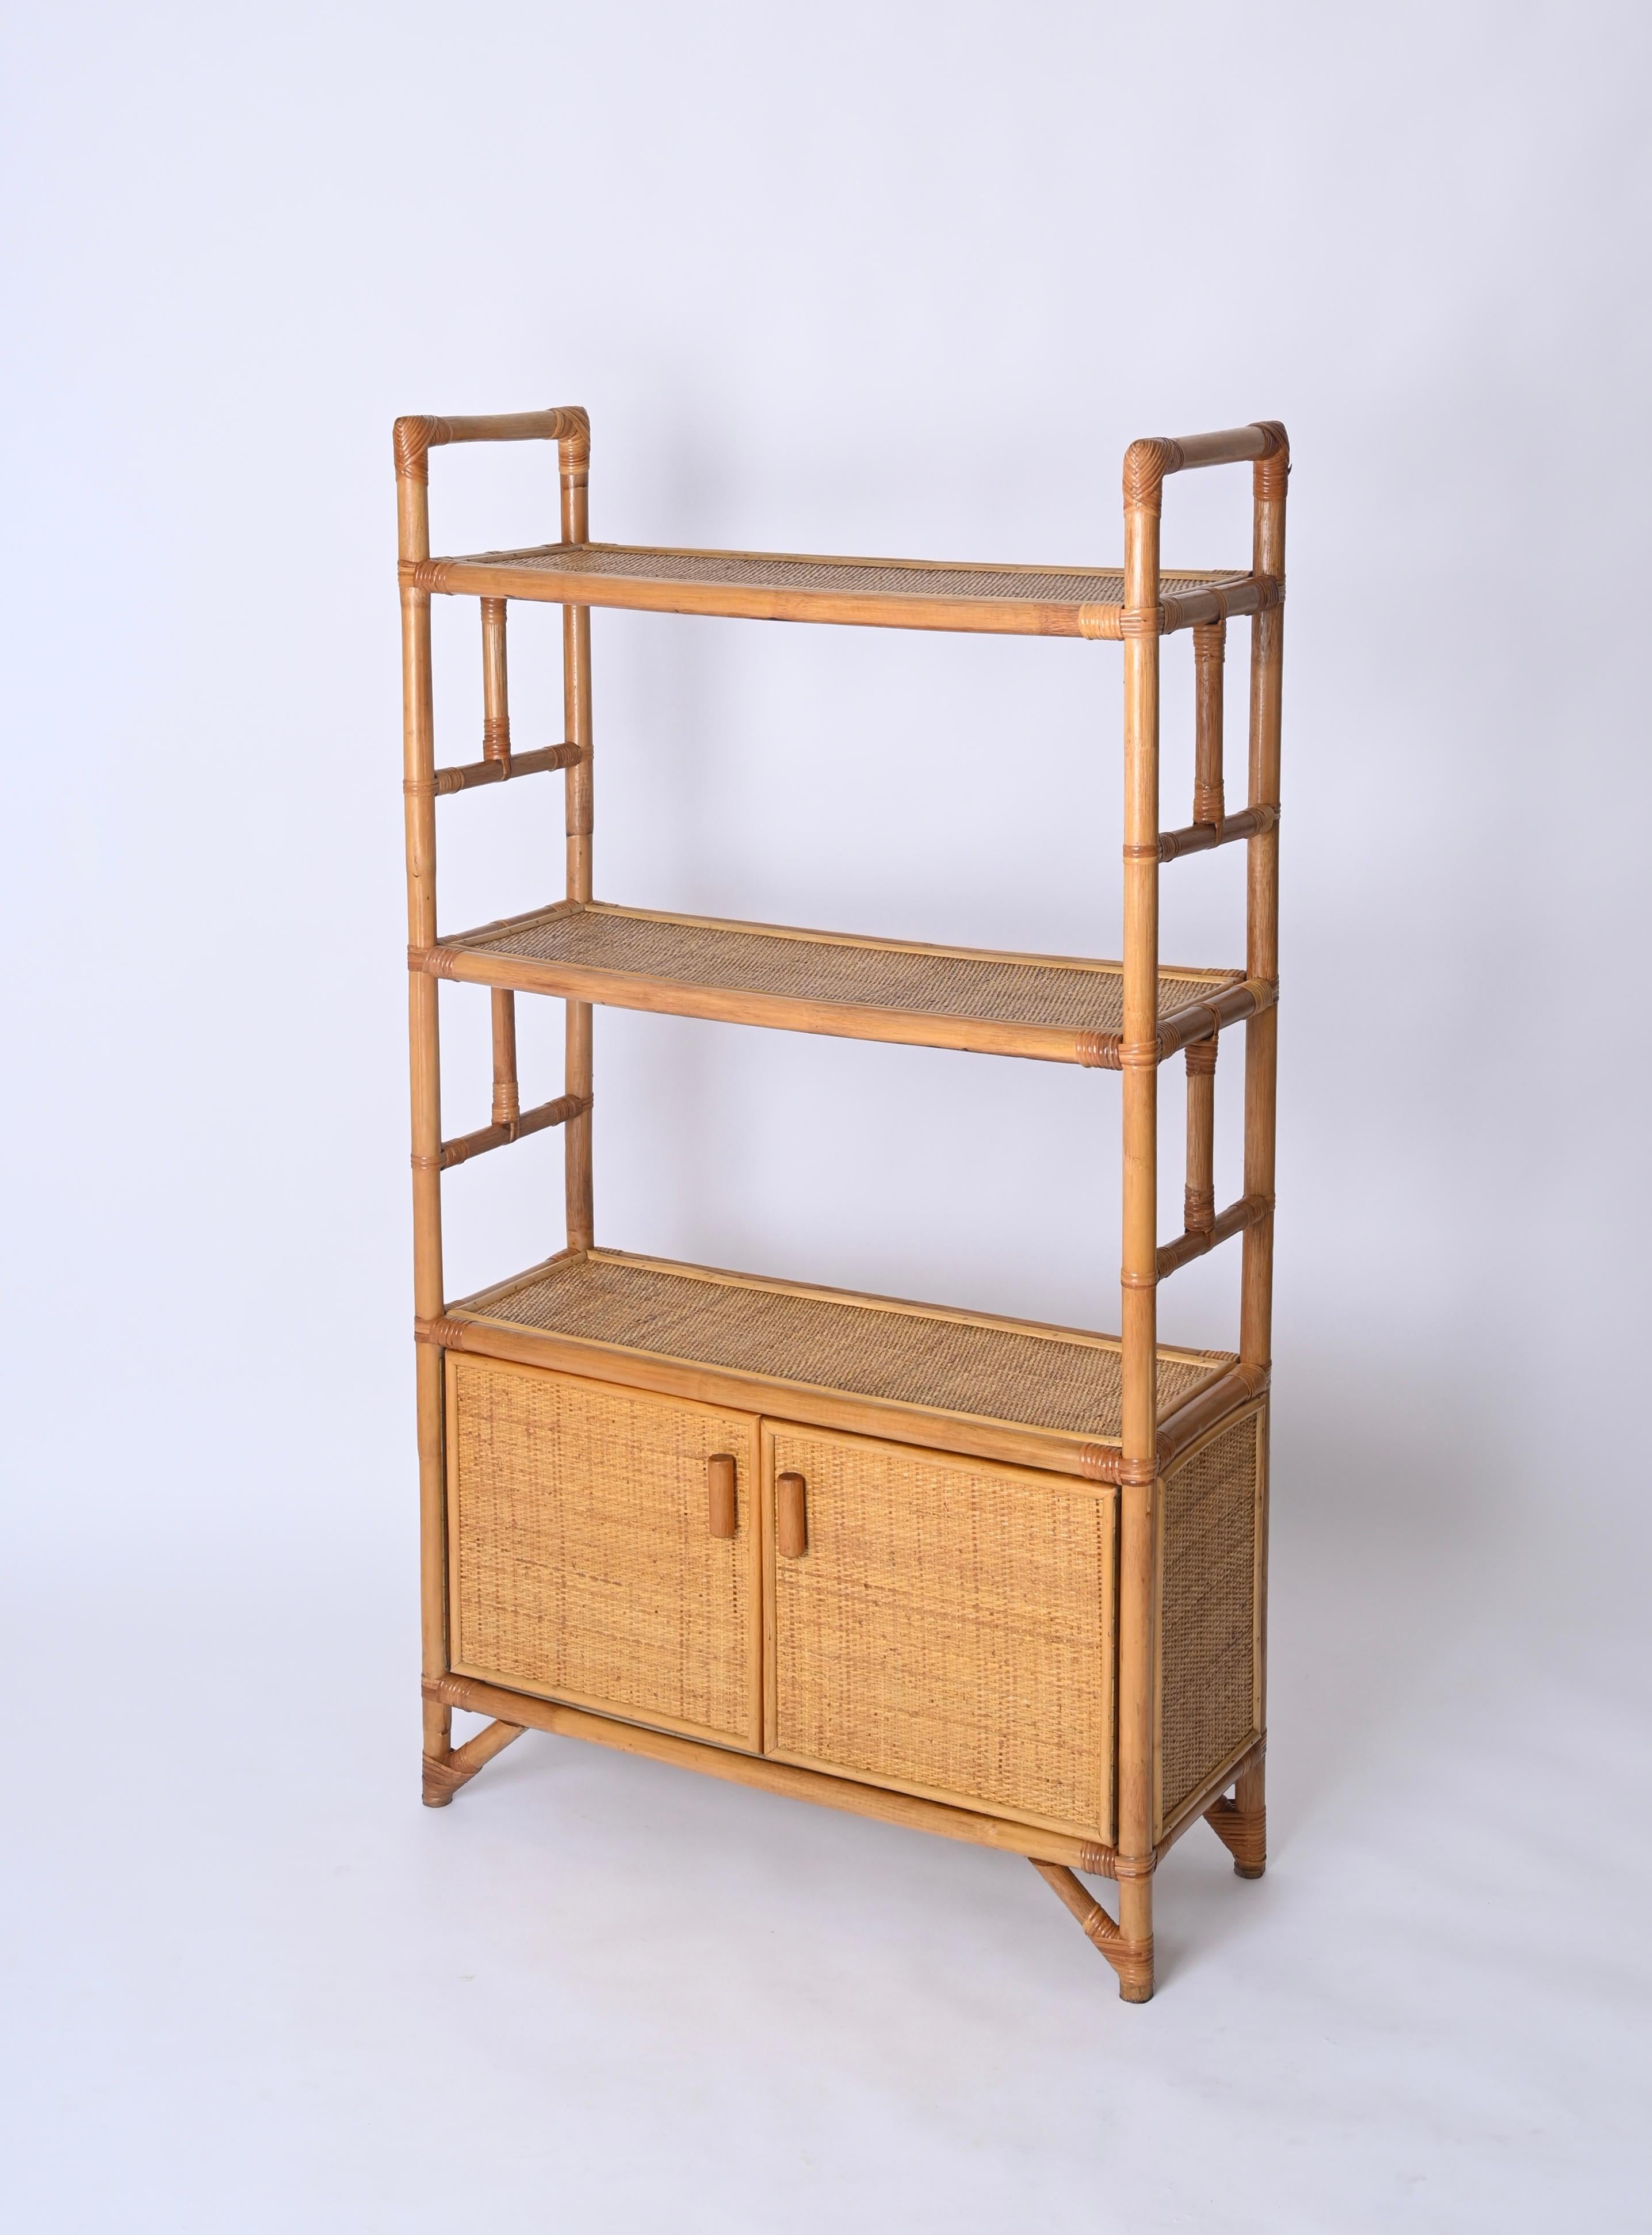 20th Century Midcentury Italian Modern Rattan and Bamboo Bookcase with Doors, 1970s For Sale